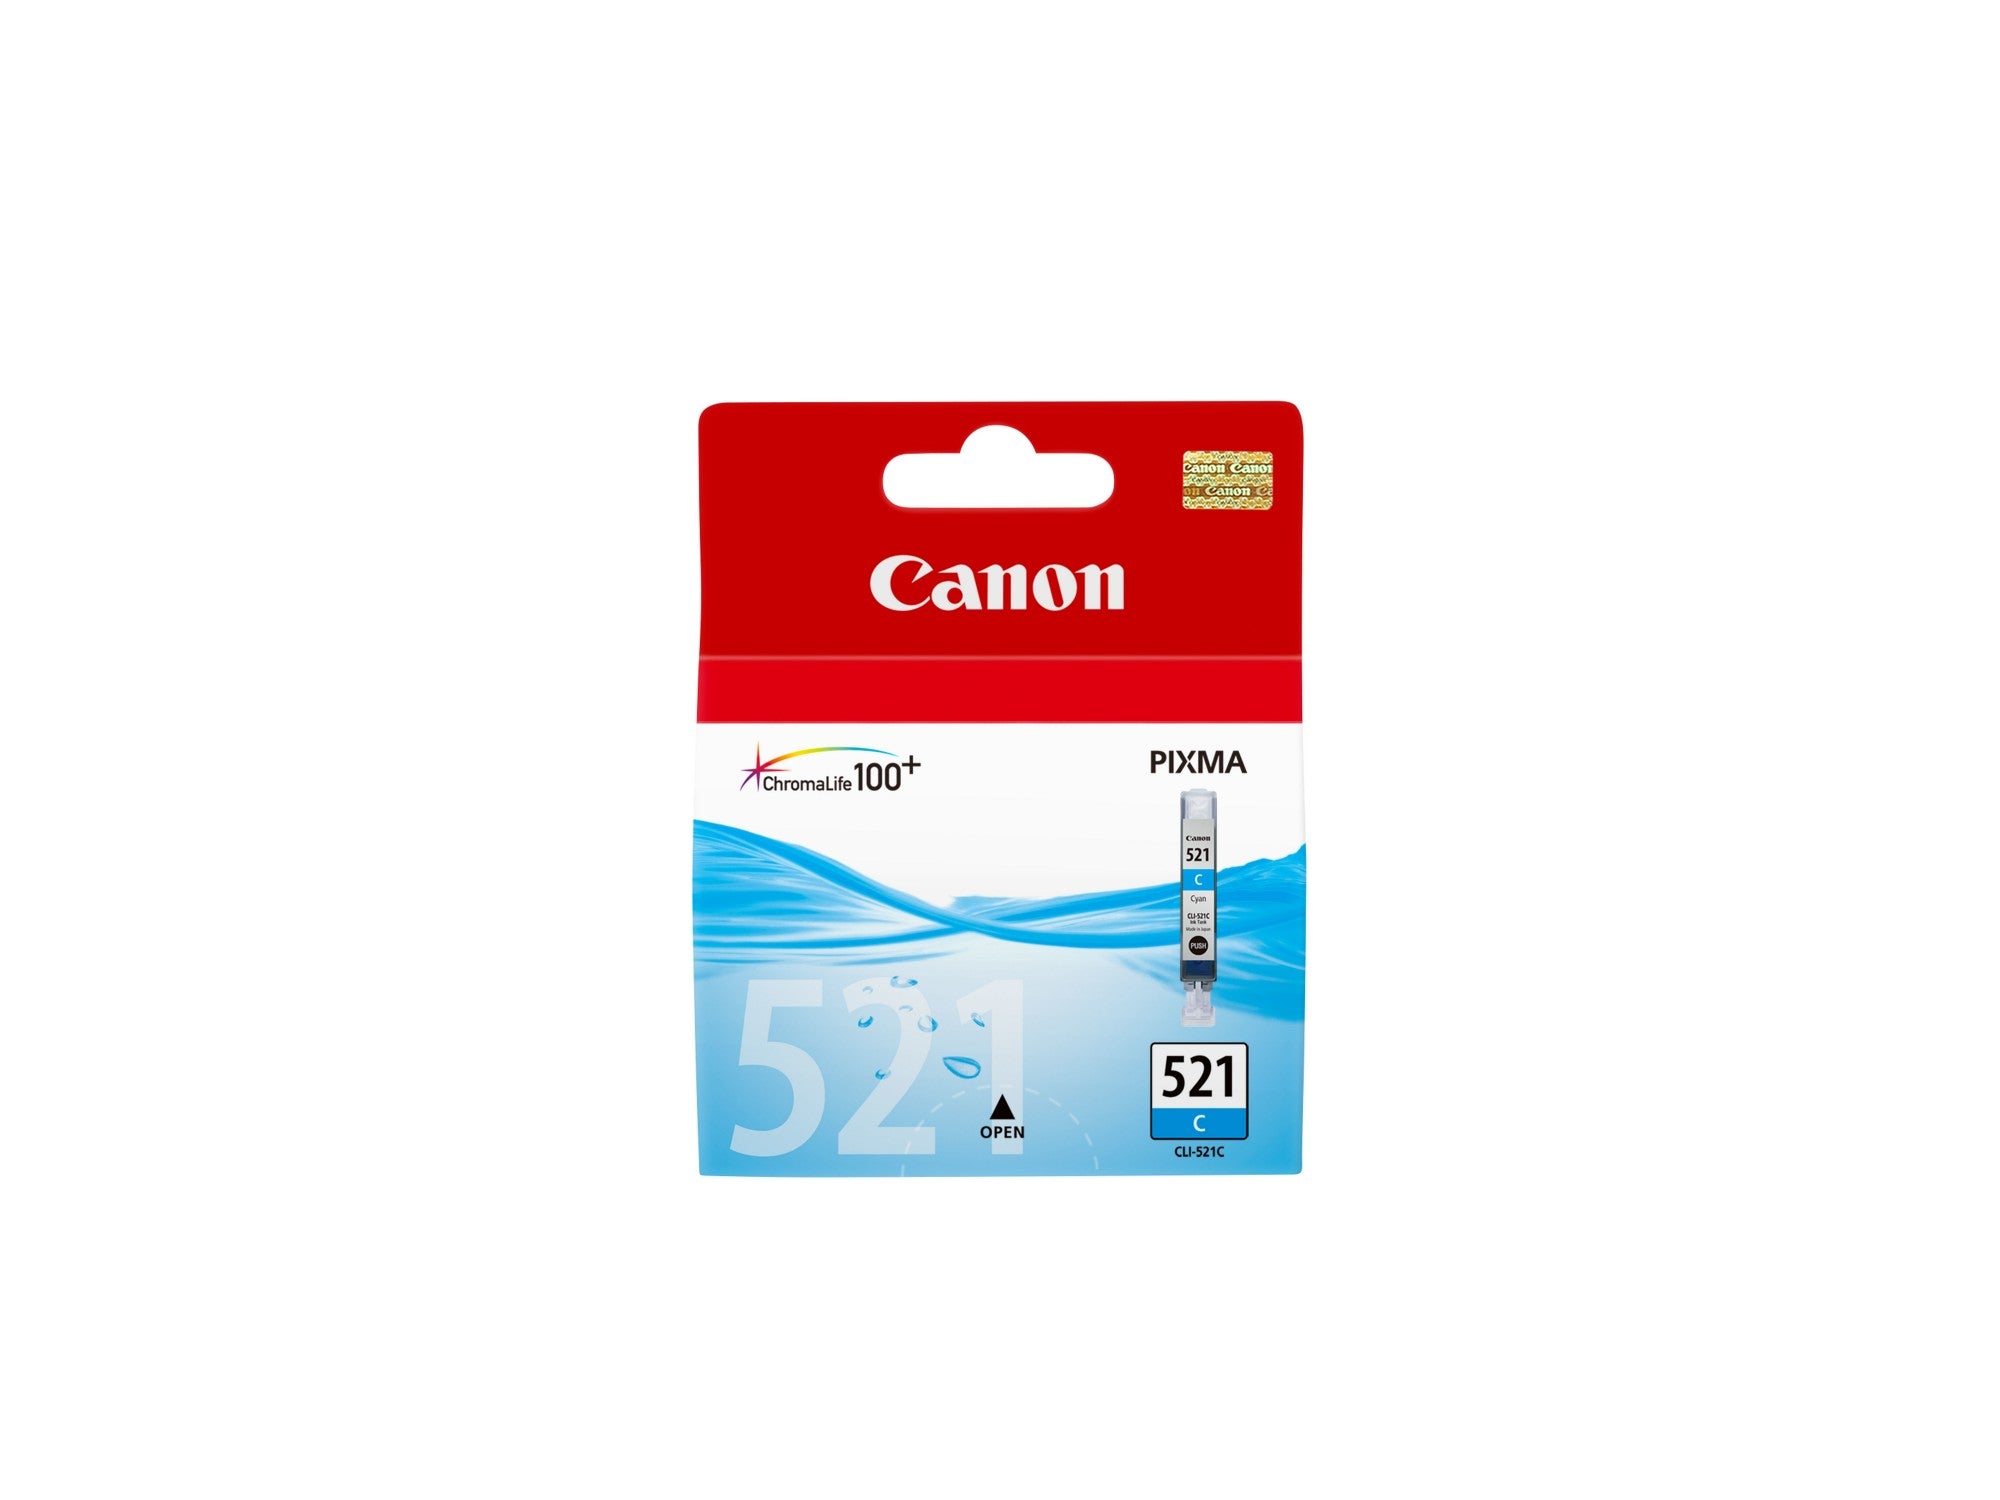 Canon 2934B001/CLI-521C Ink cartridge cyan, 448 pages ISO/IEC 24711 205 Photos 9ml for Canon Pixma IP 3600/MP 980